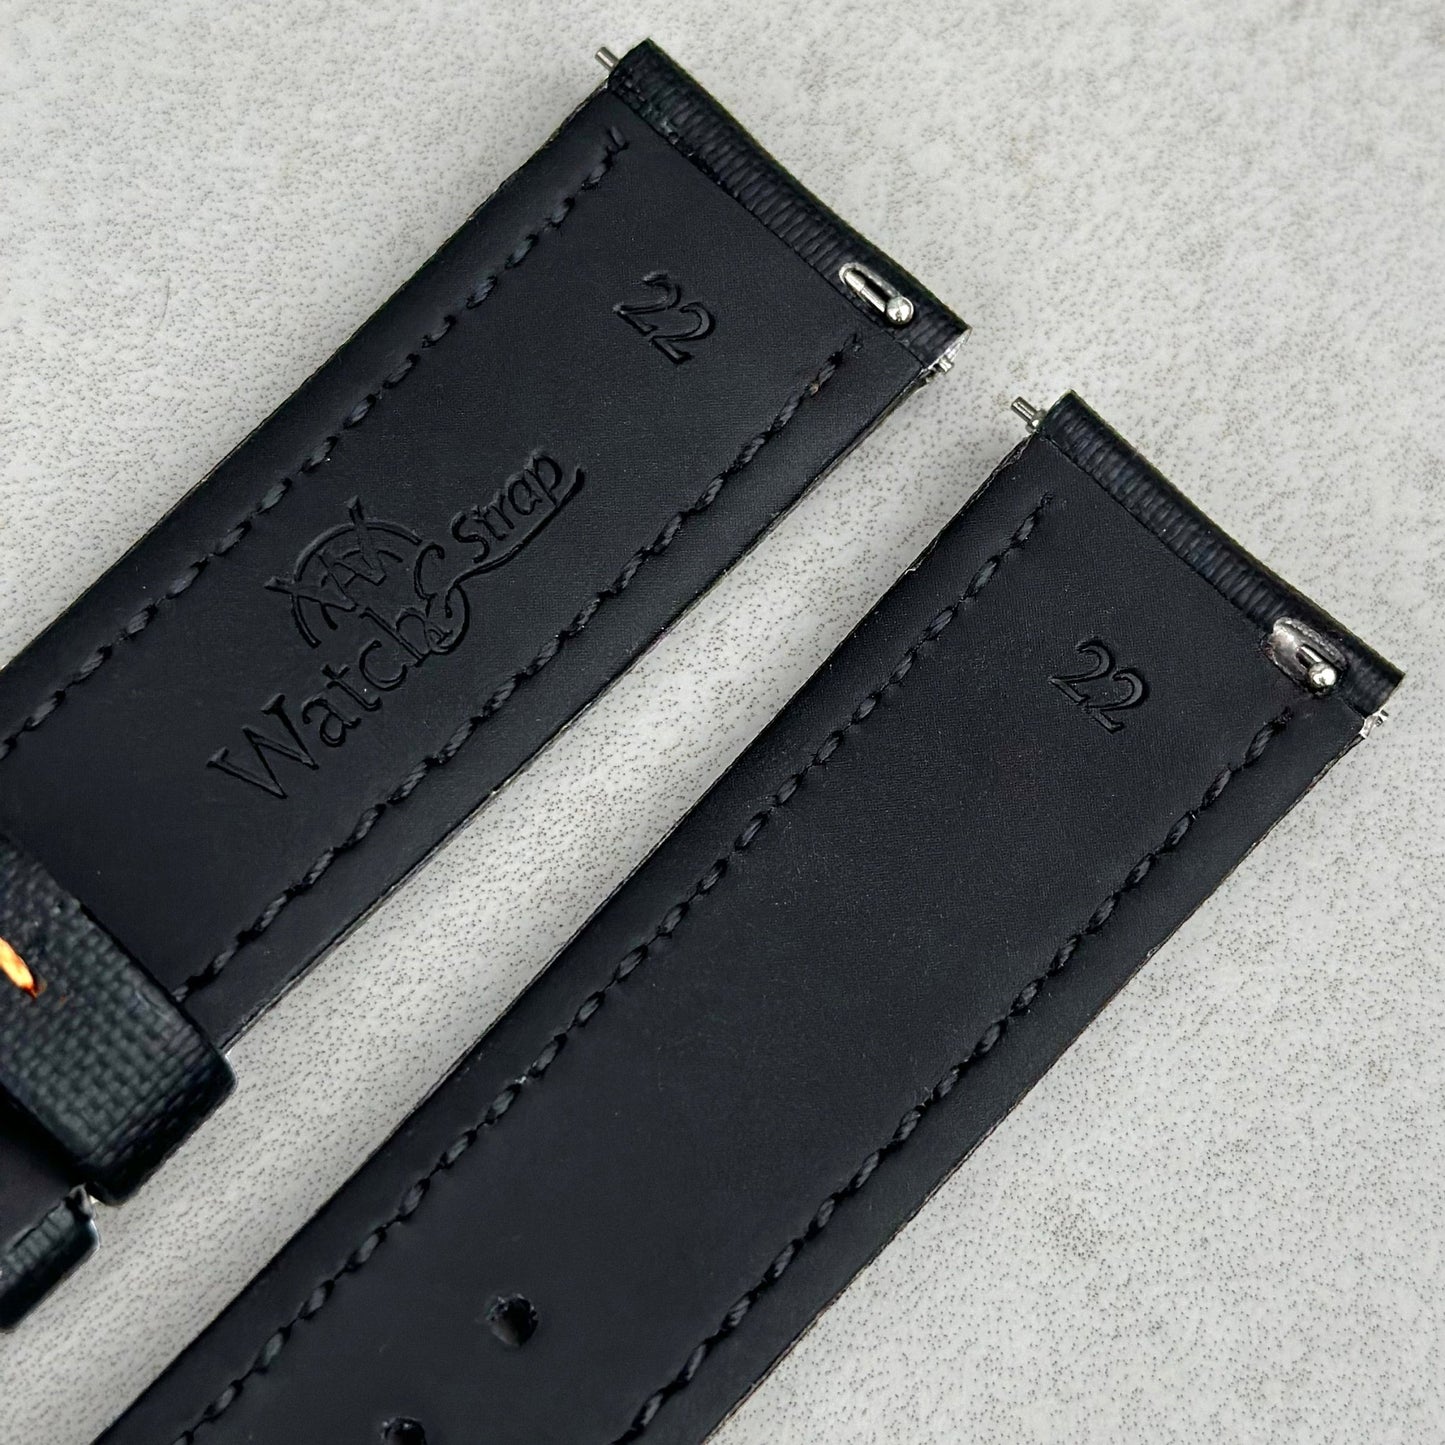 Quick release pins on the Bermuda jet black sail cloth watch strap with blue stitching. Watch And Strap